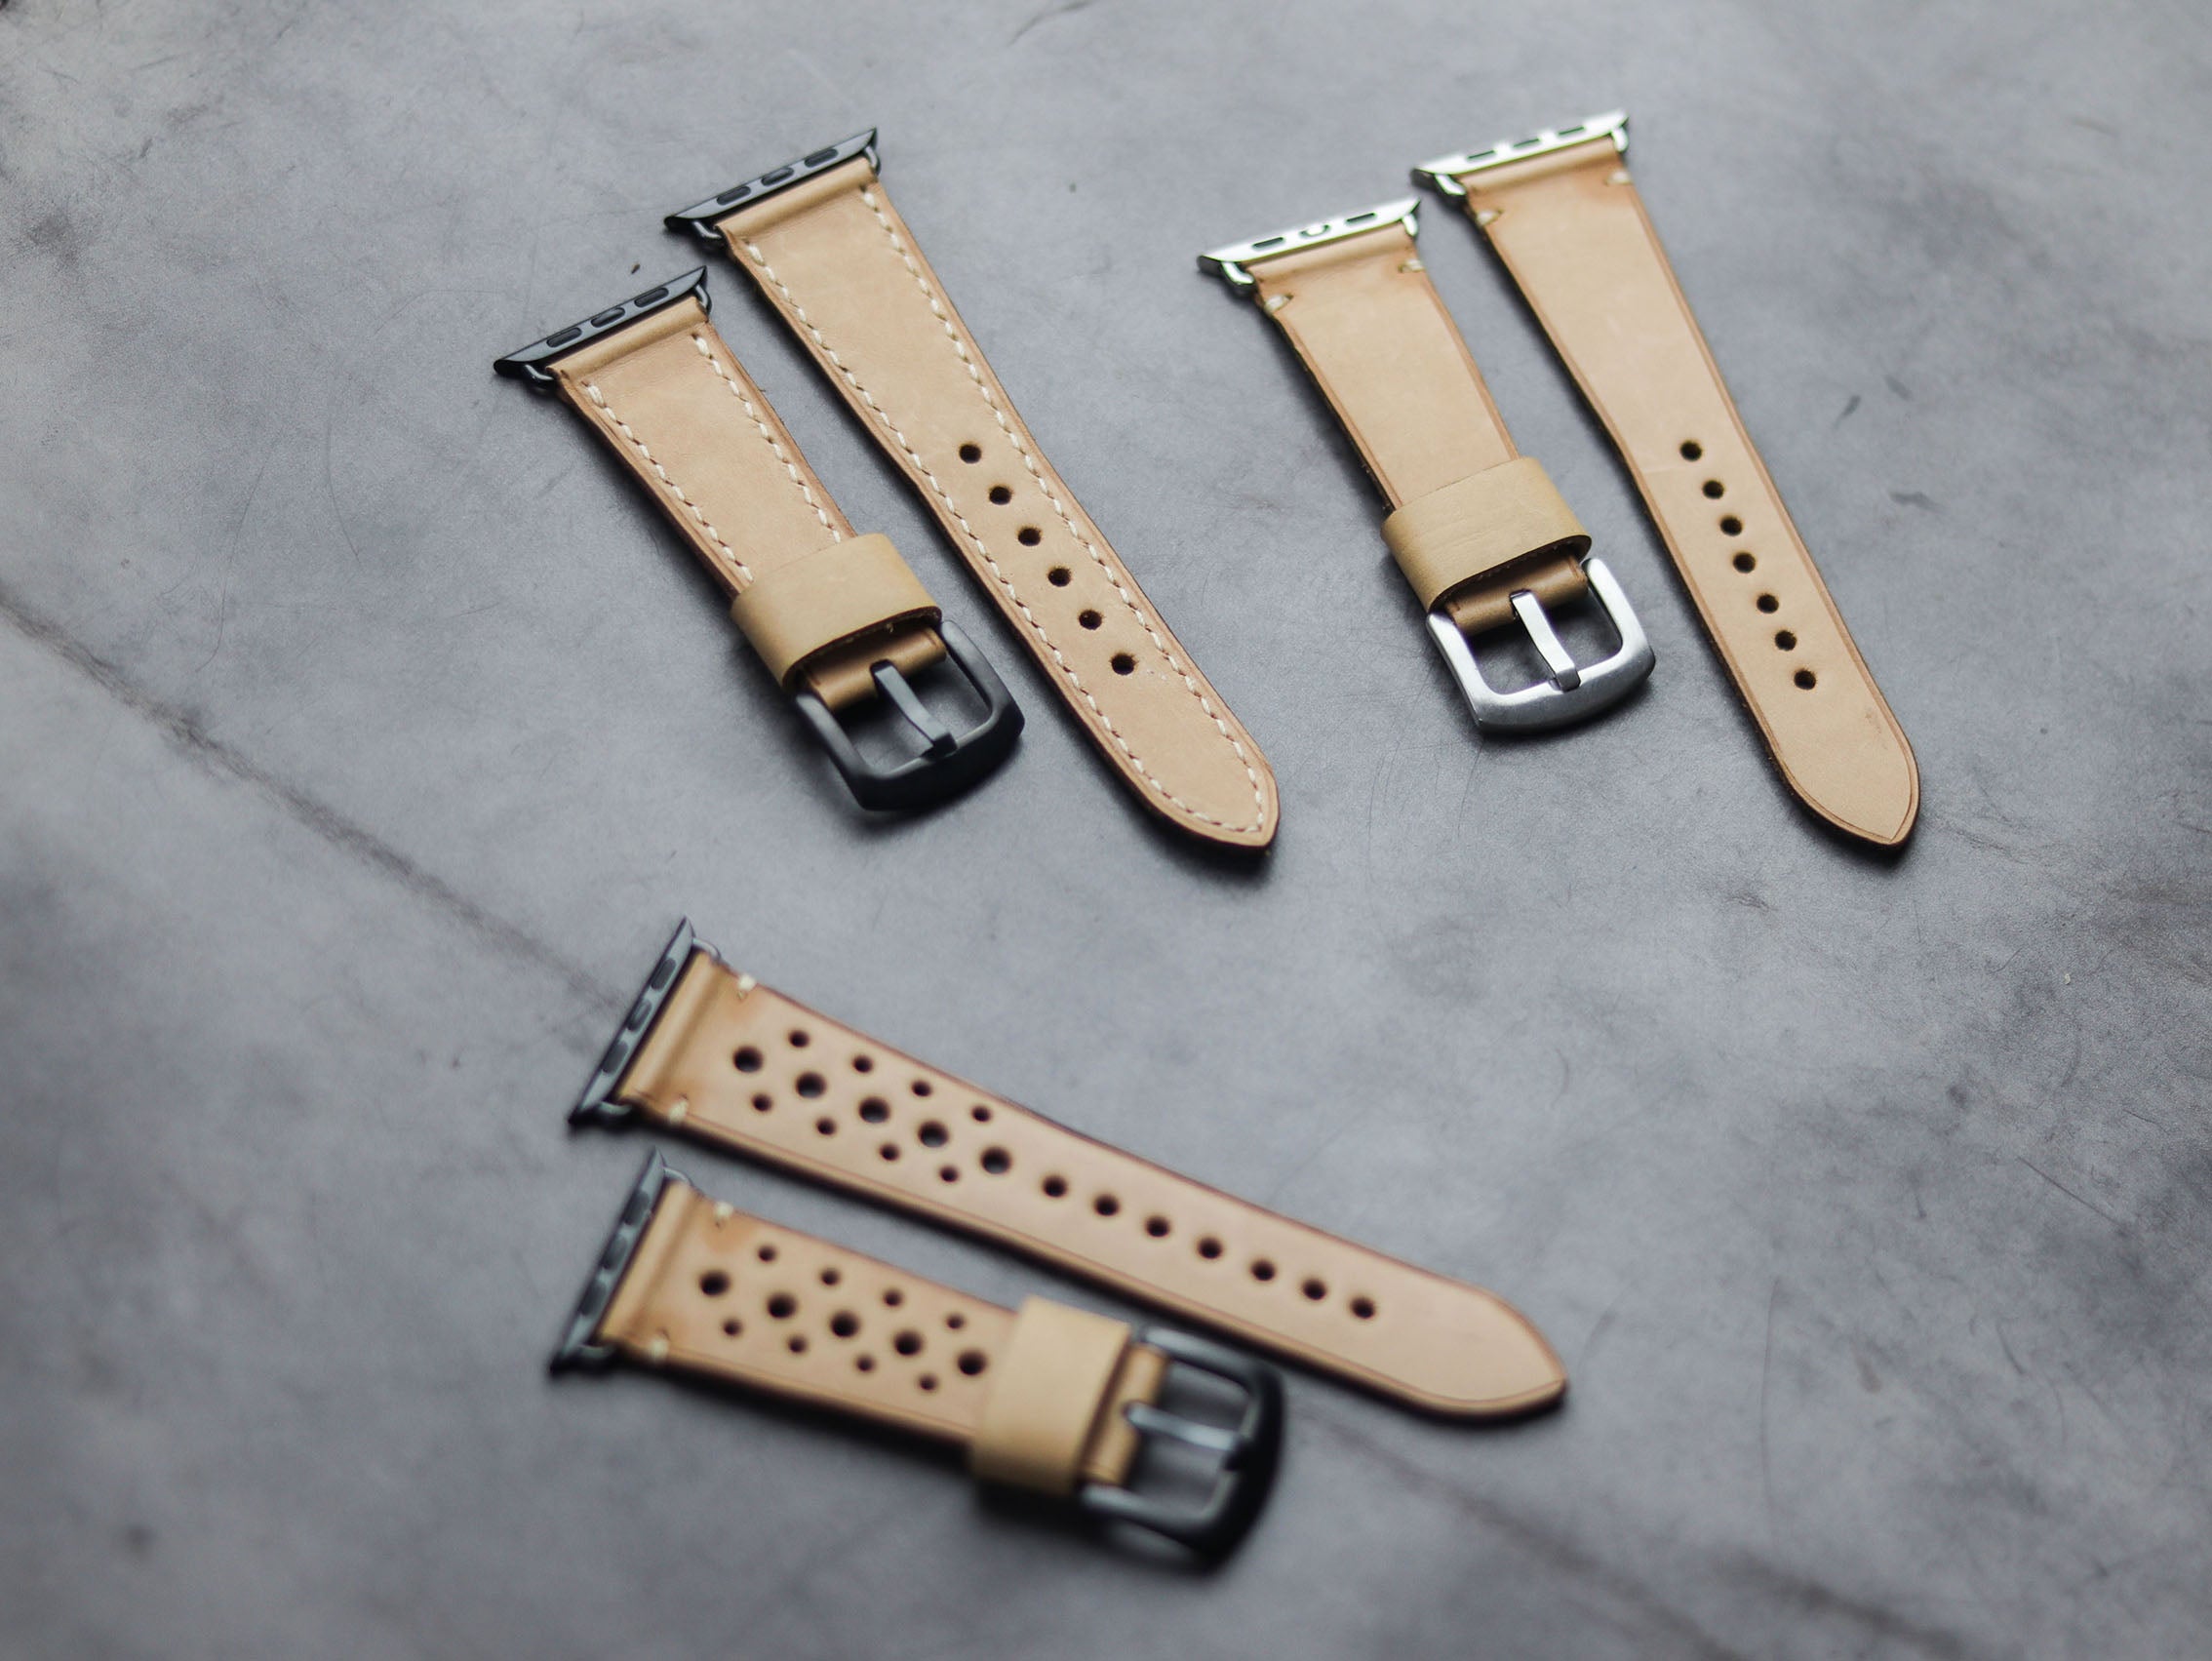 NATURAL BUTTERO FULL STITCHED HAND-CRAFTED APPLE WATCH STRAPS